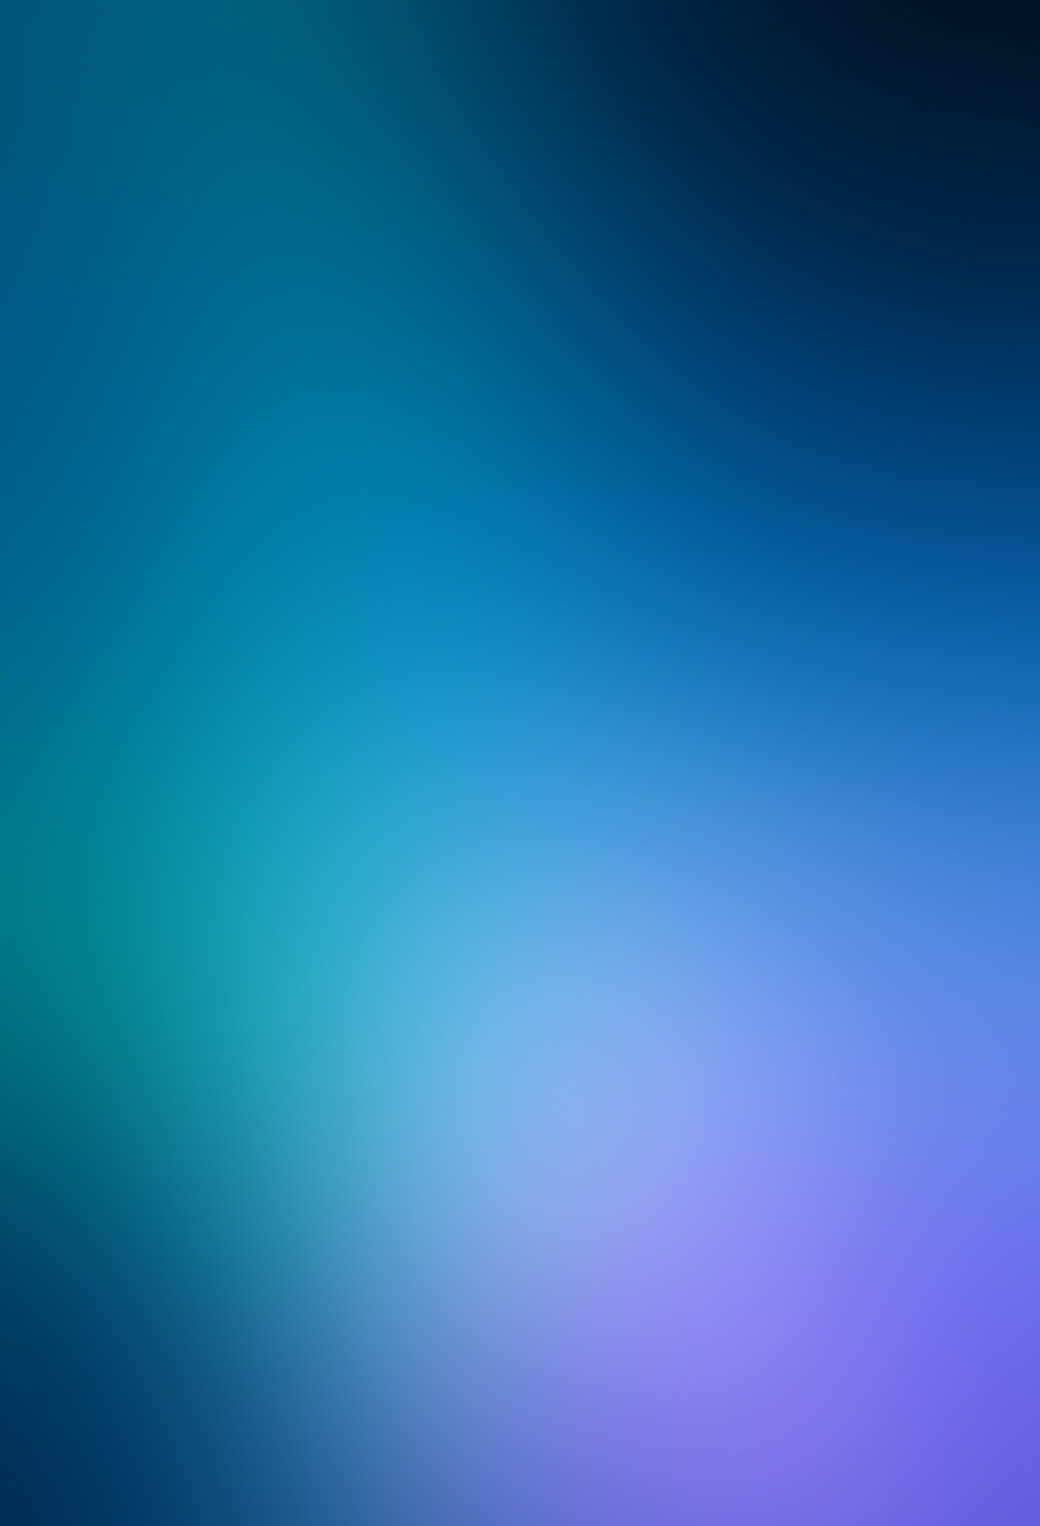 730x1071 20 parallax iOS 7 wallpapers for iPhone ready to download 1040x1526